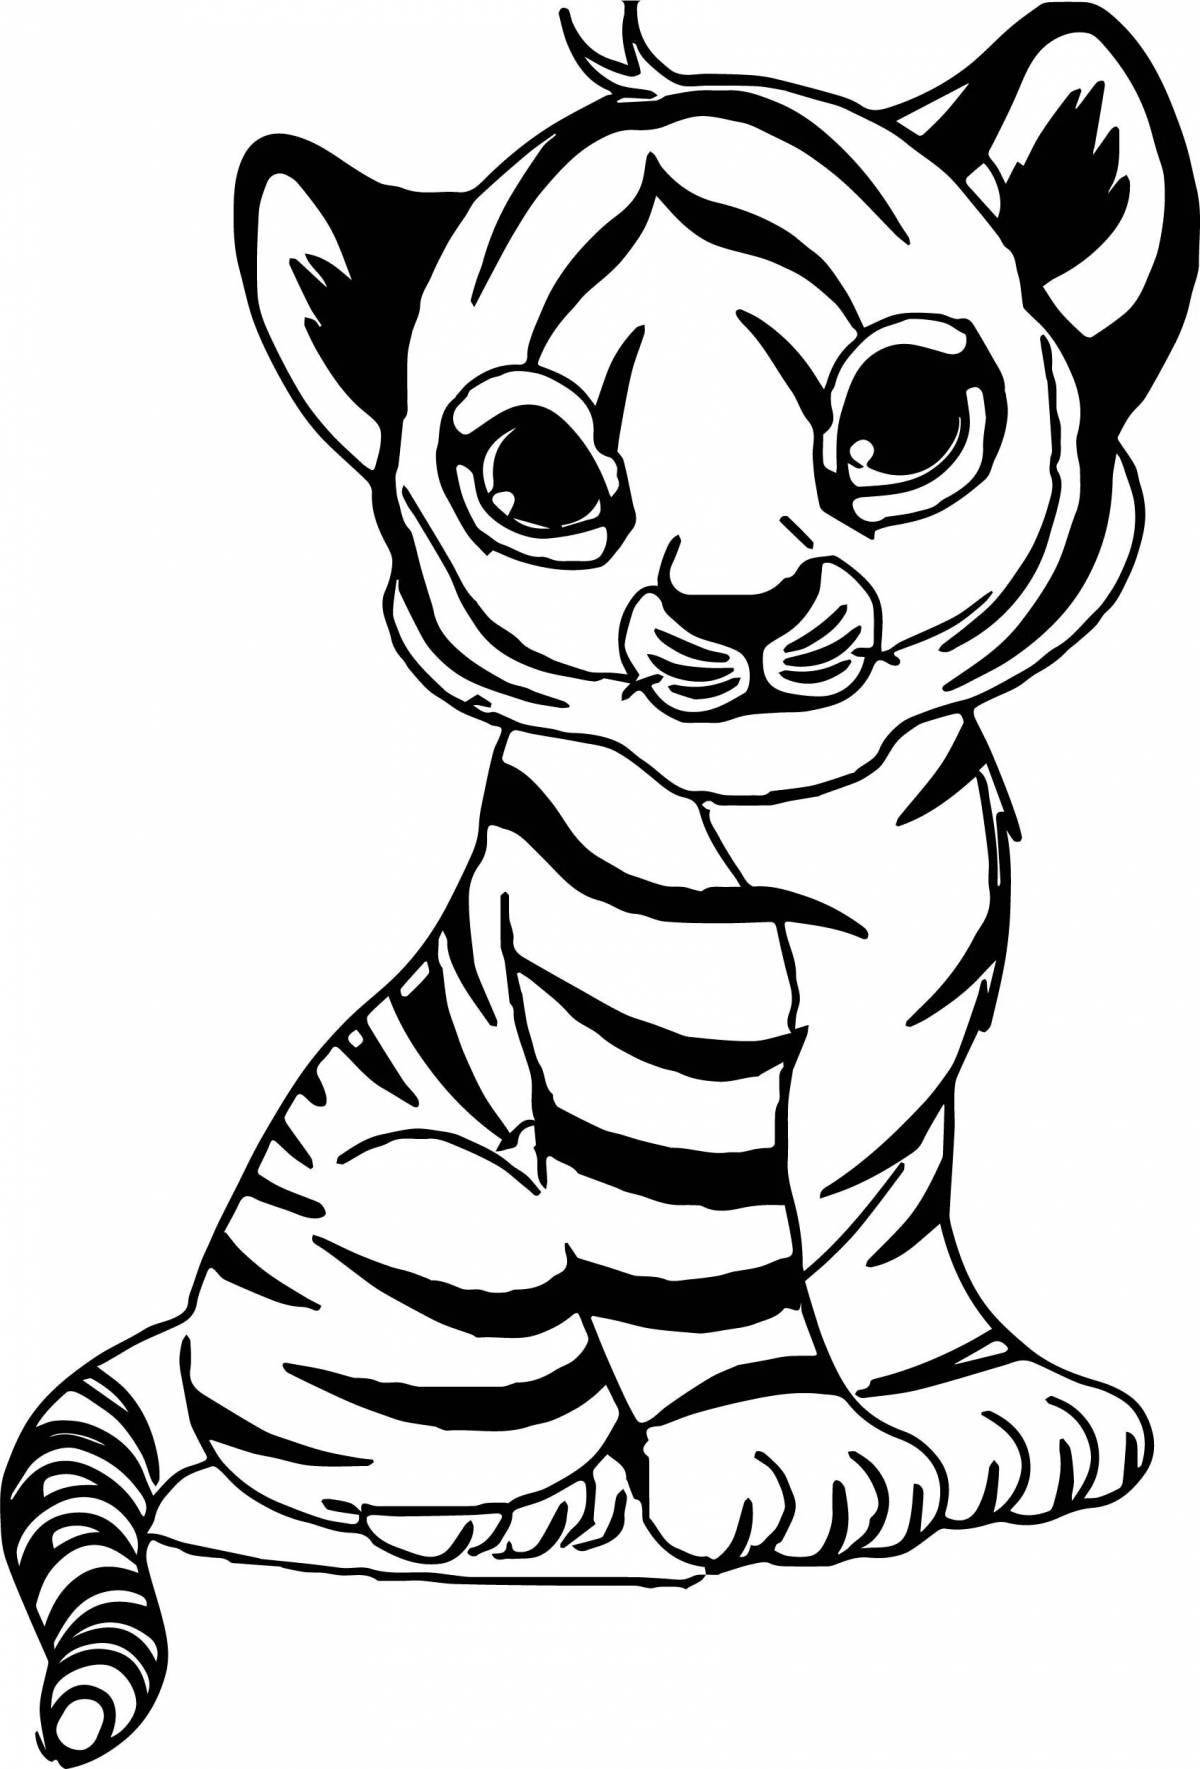 Attacking tiger cub coloring page